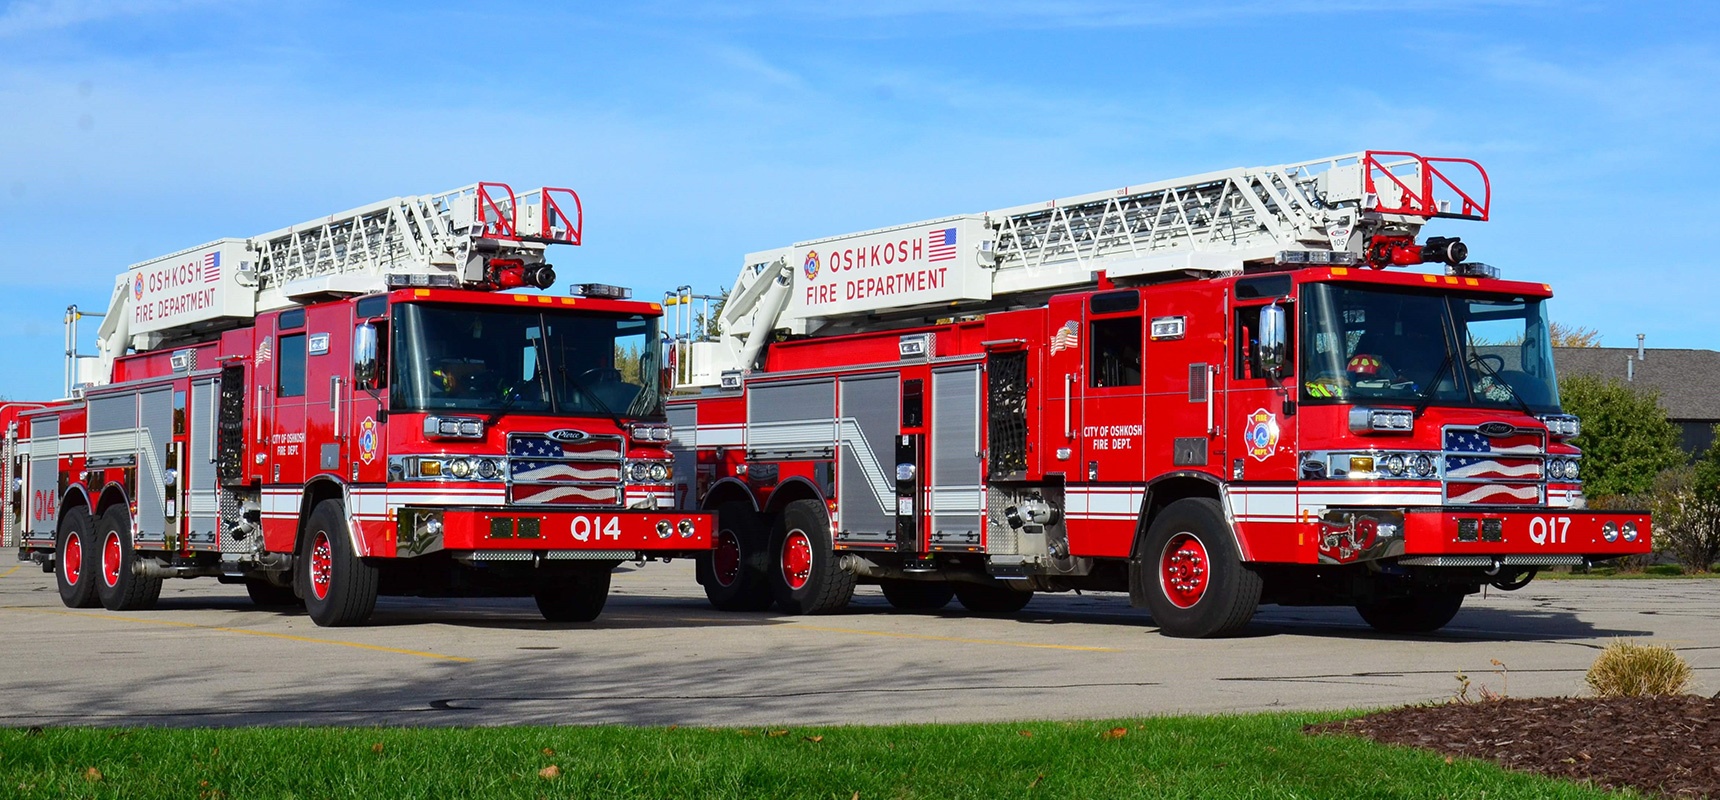 Pierce-Places-TAK-4-T3-System-Equipped-Quantum-Aerials-Into-Service-At-The-Oshkosh-Fire-Department_Header.jpg